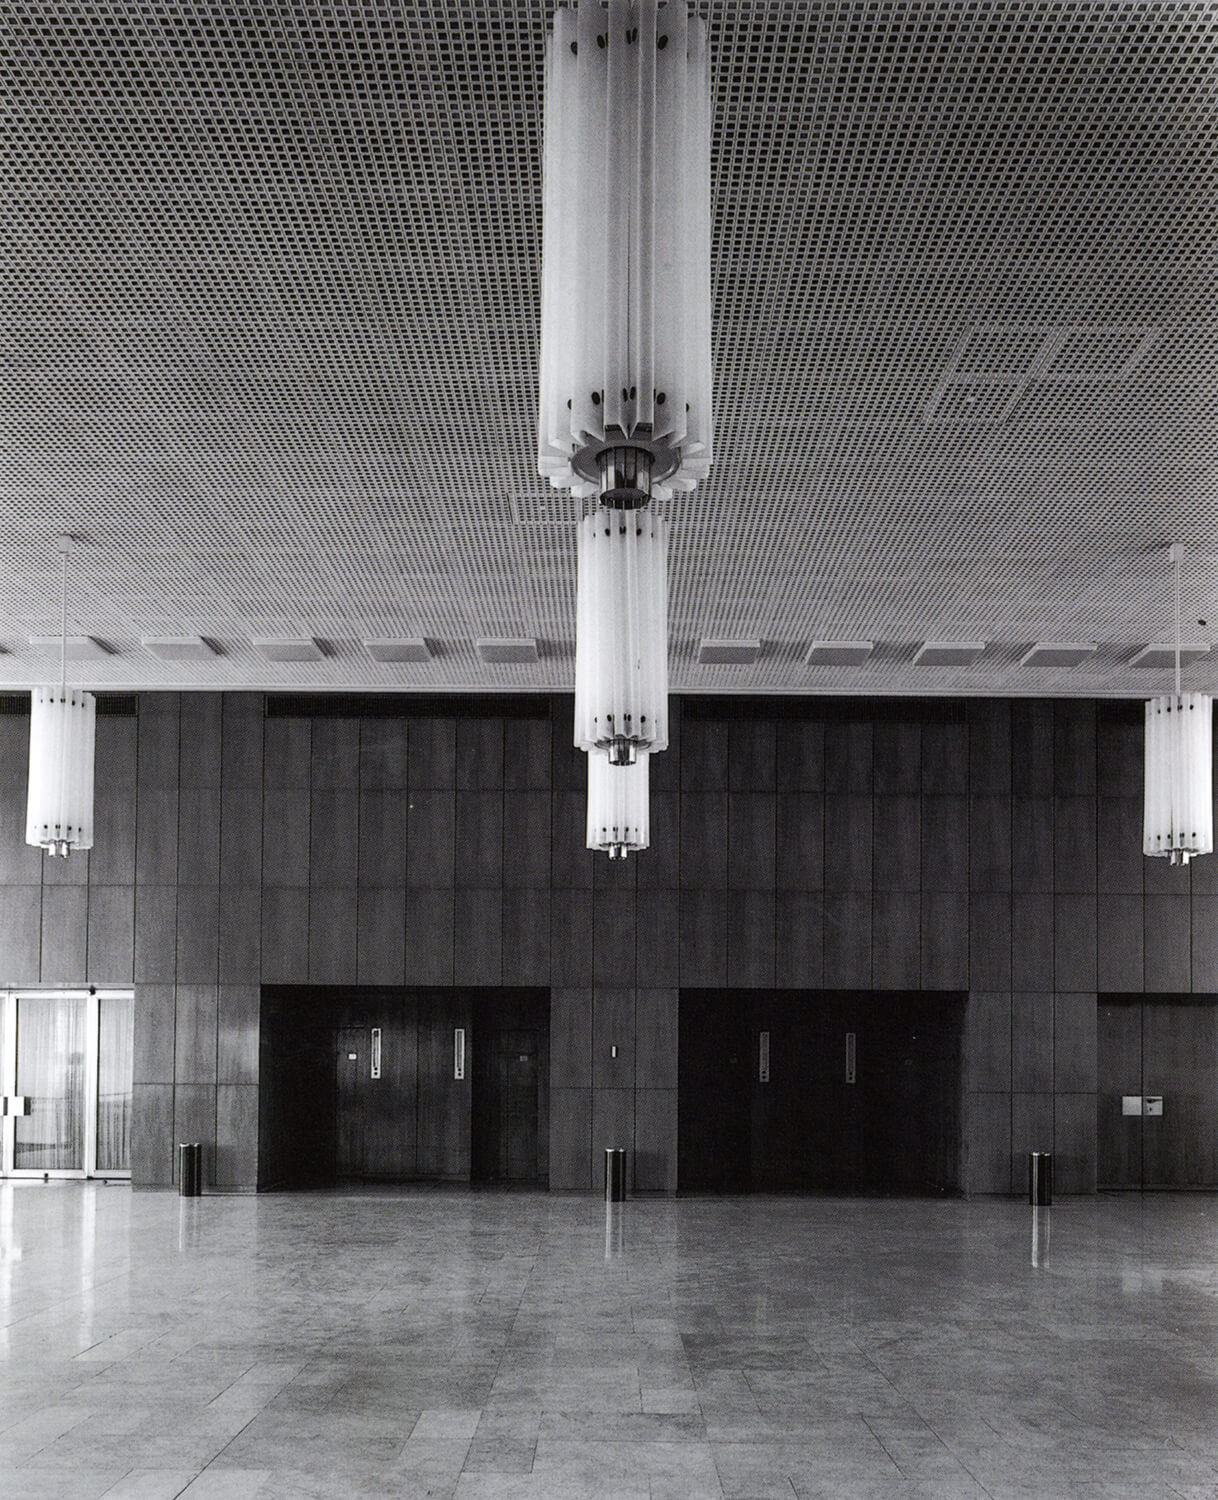 Doug Hall, Second Floor Foyer, Council of State Builidng, 1992, gelatin silver print, 1/5, 156 x 123 cm, framed